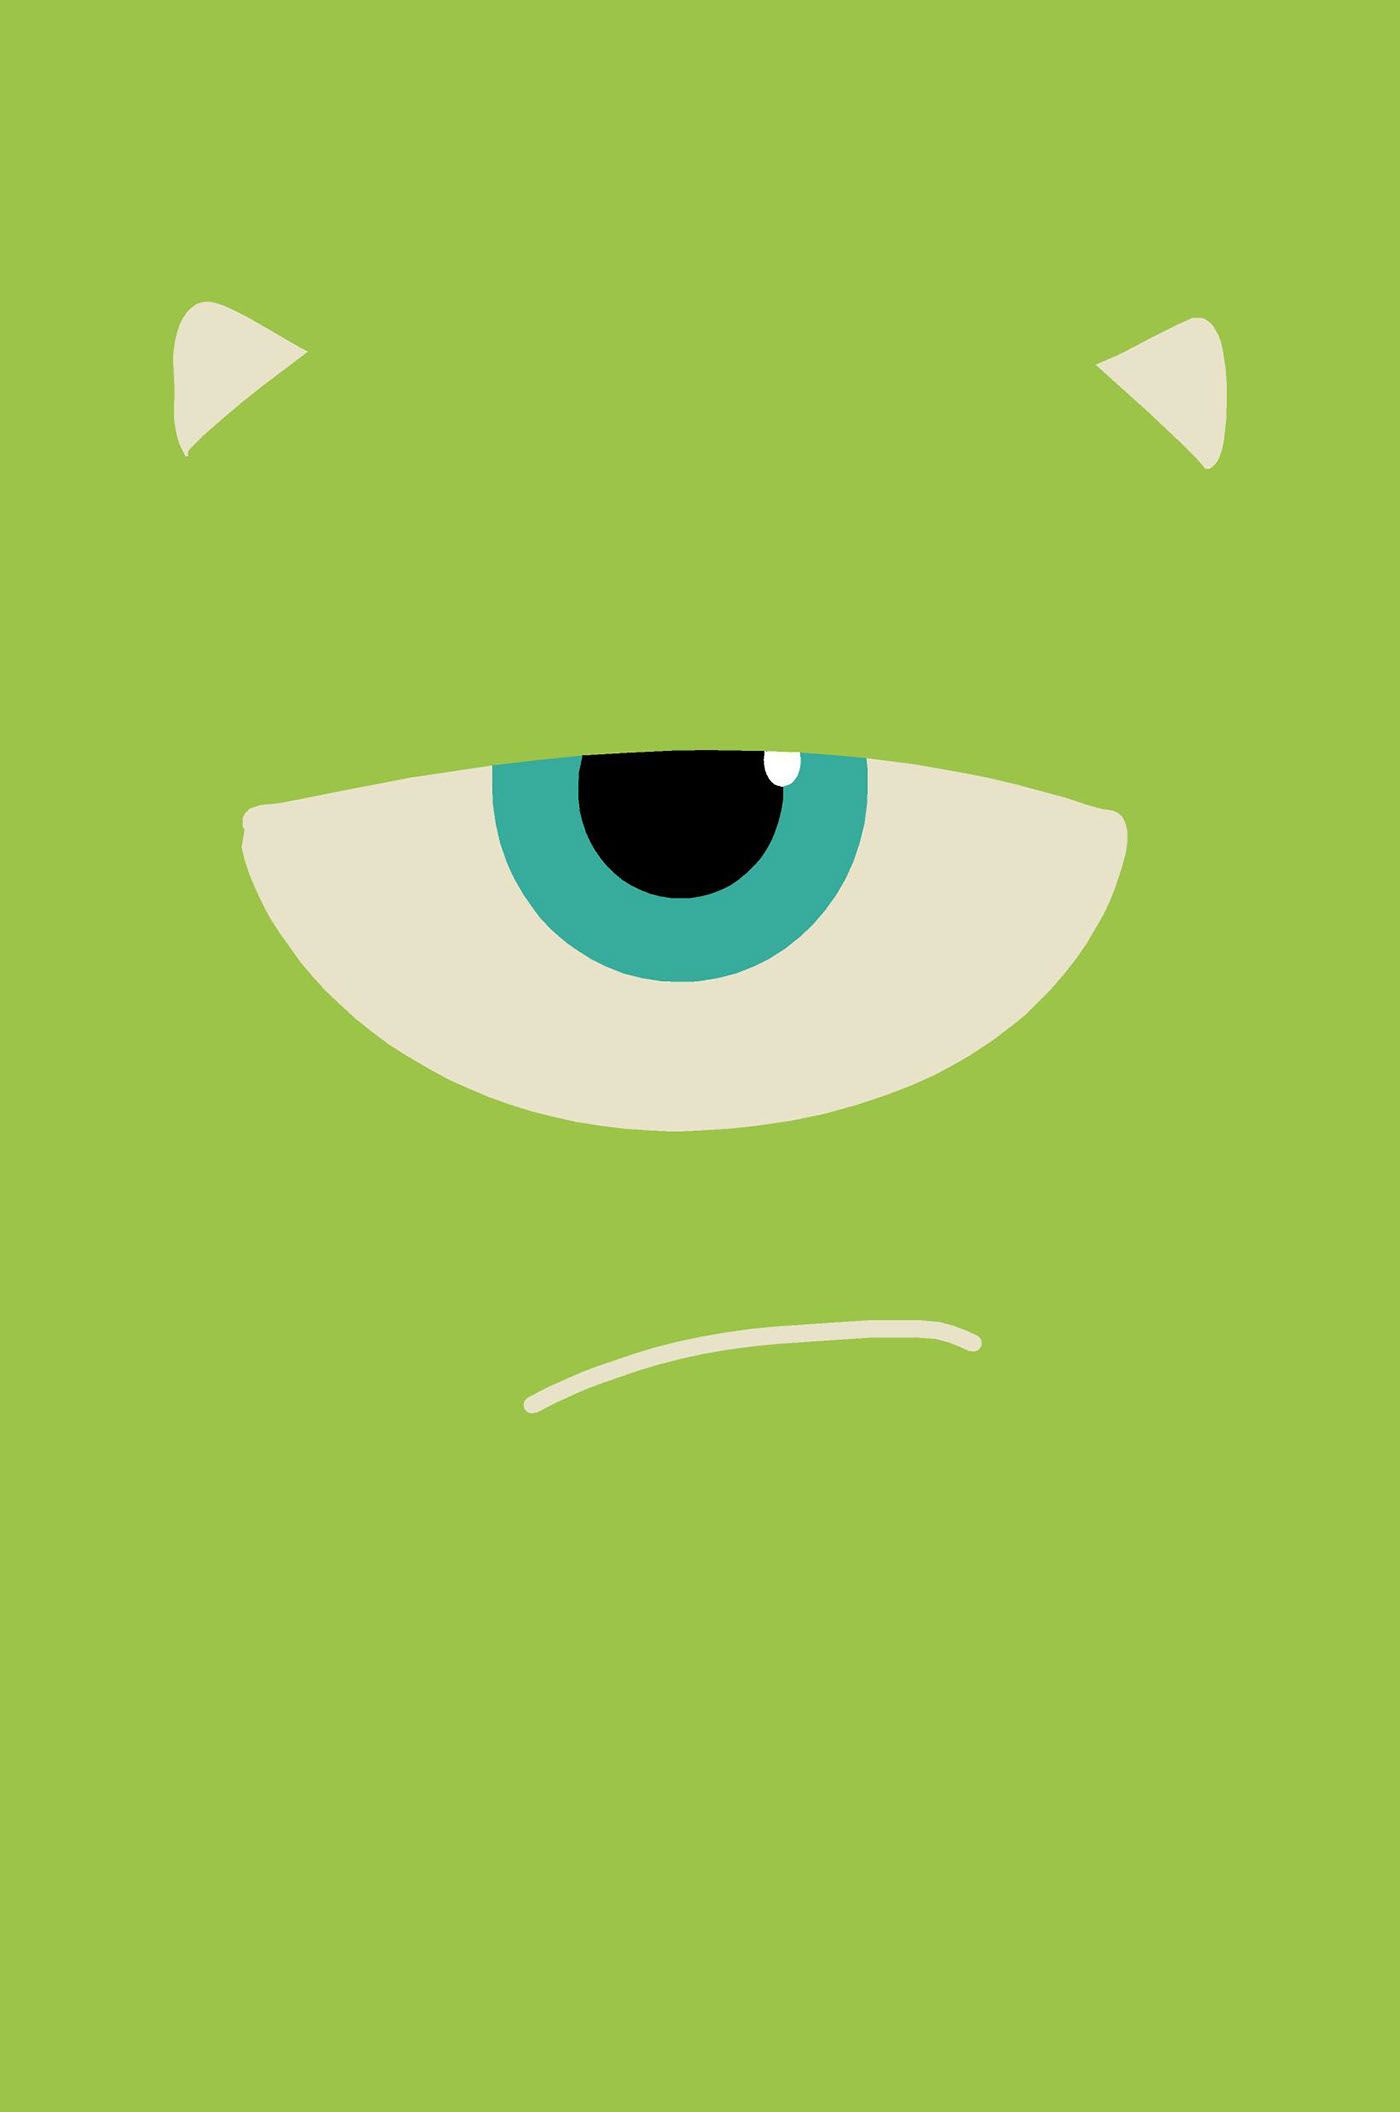 Monsters Inc iPhone Wallpapers on WallpaperDog